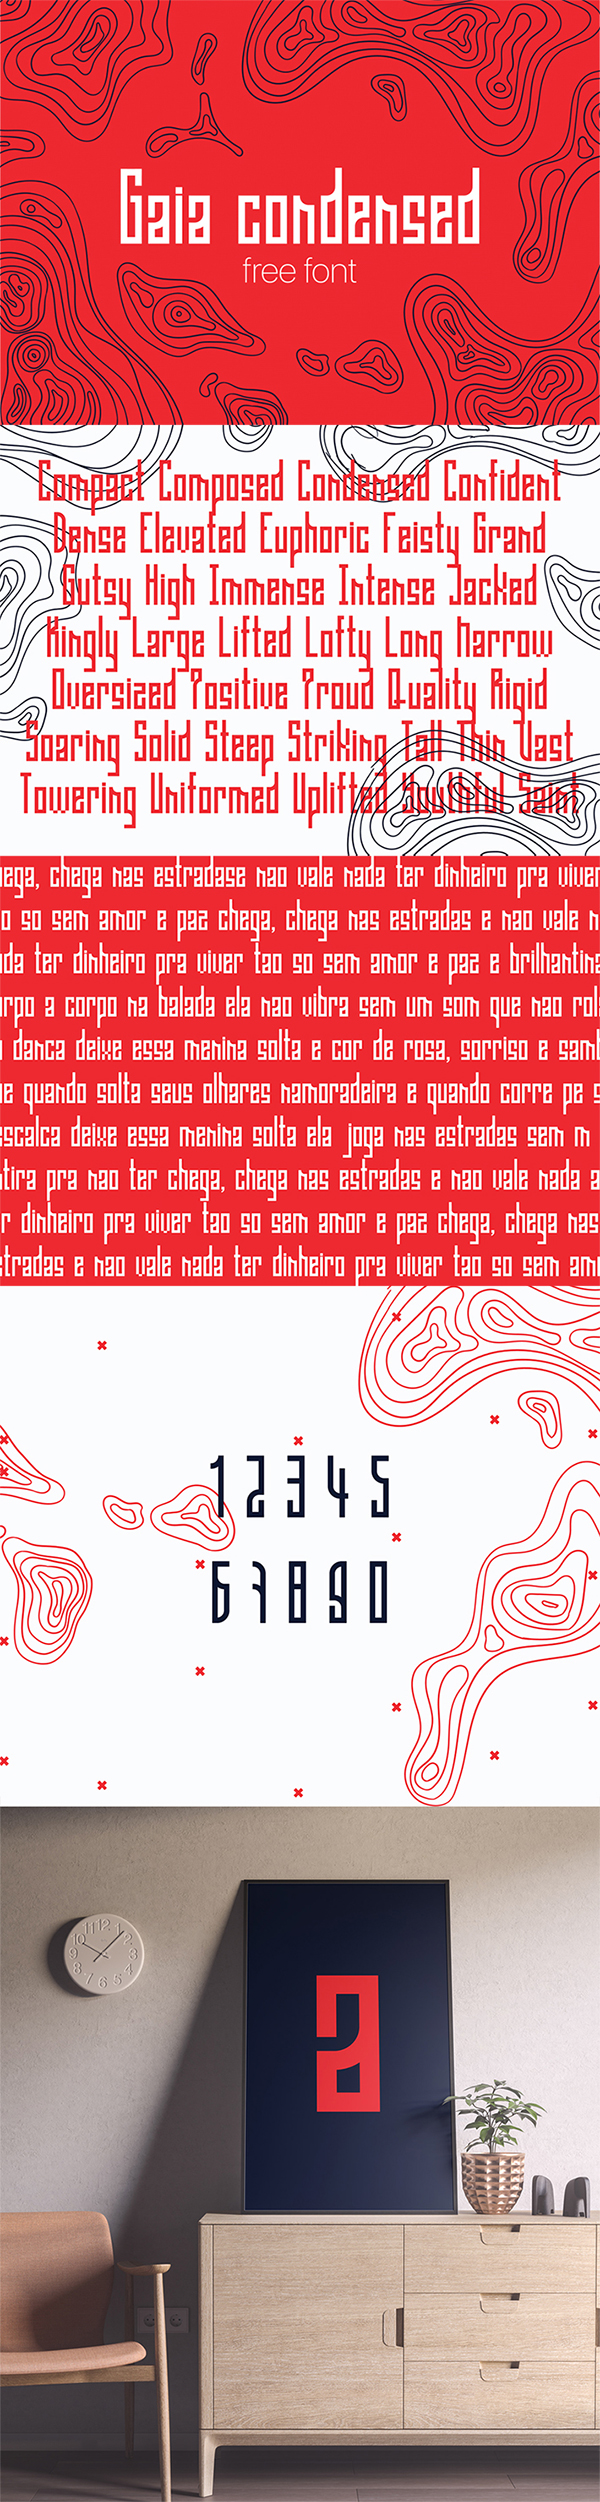 Free Awesome Gaia Condensed Display Font For Designers